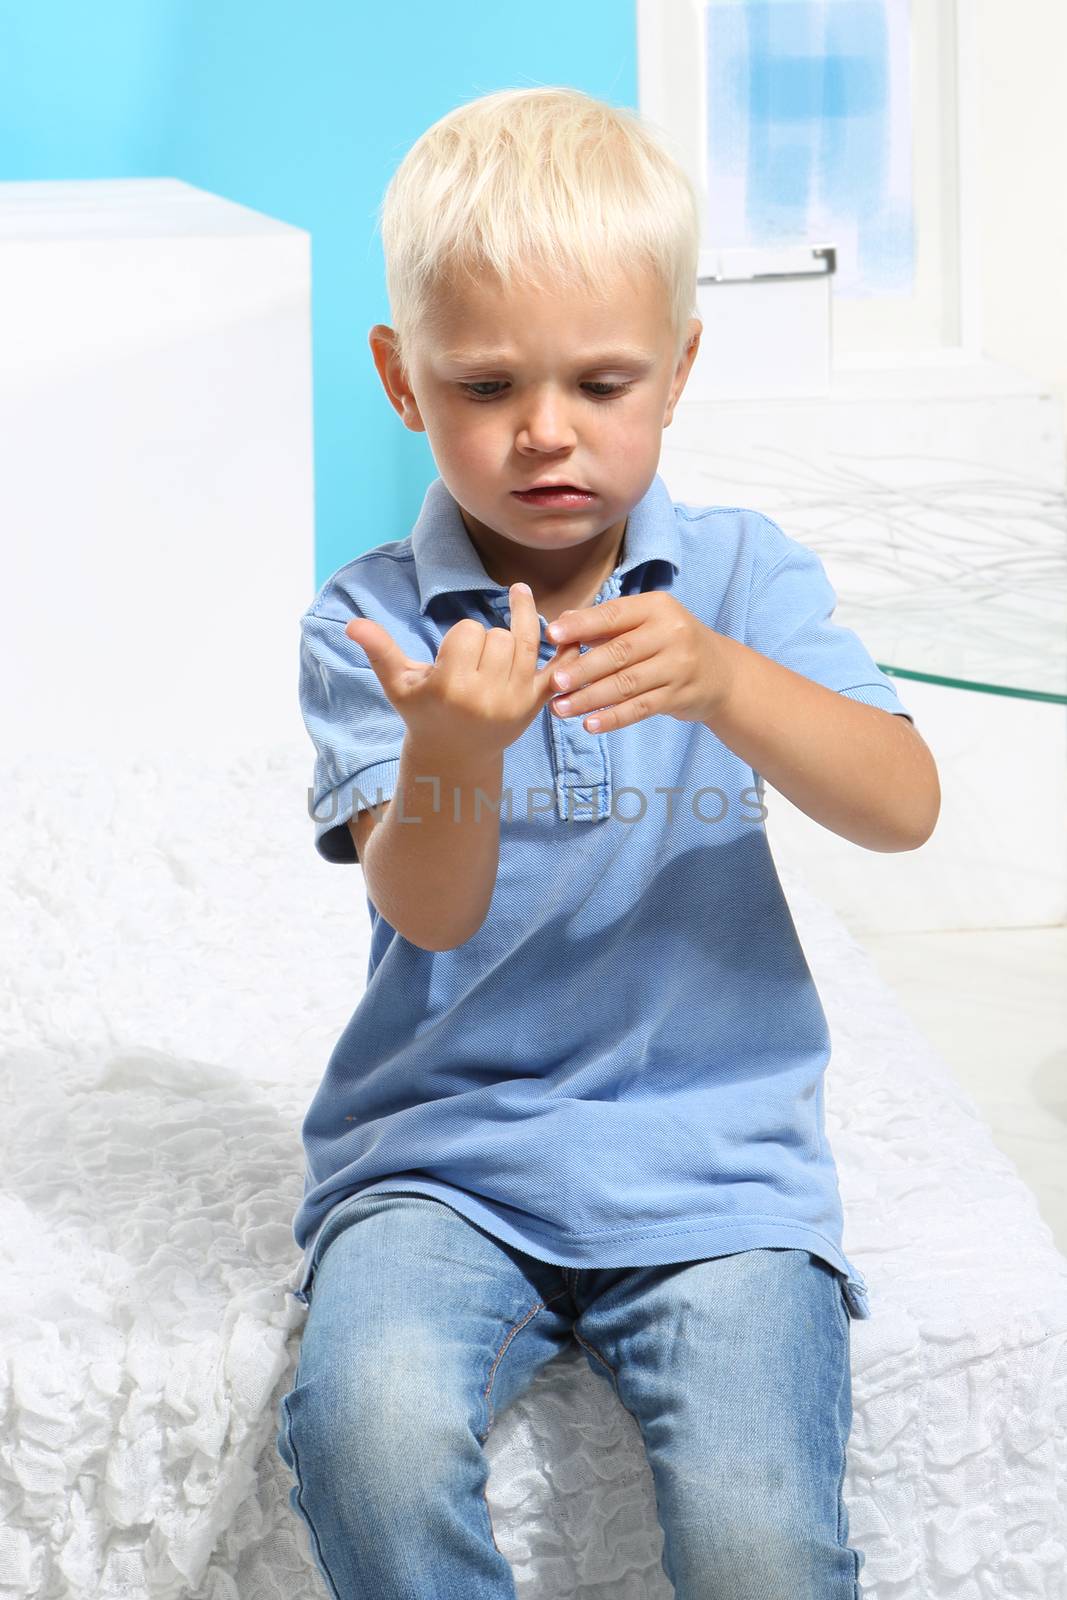 Blond boy counting fingers